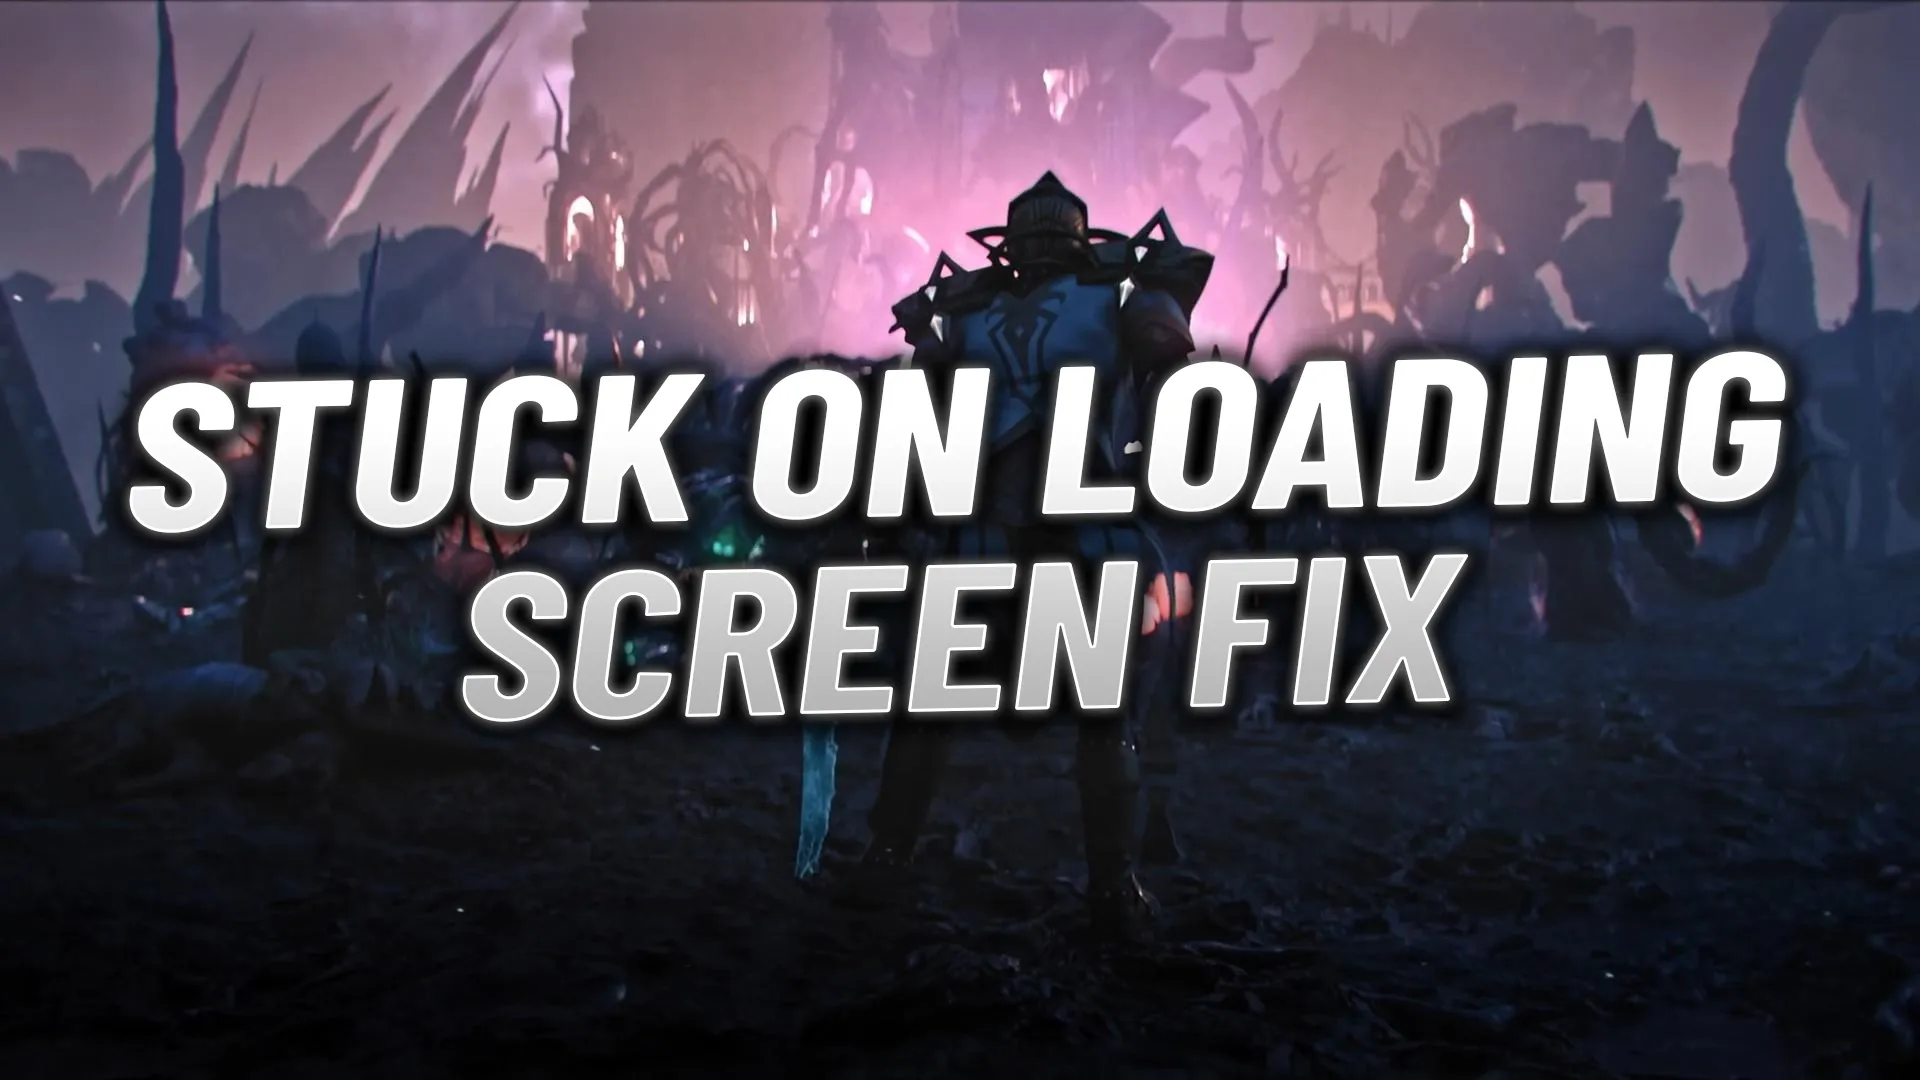 How To Fix The Infinite Loading Screen Glitch In Apex Legends (Stuck On Loading  Screen)